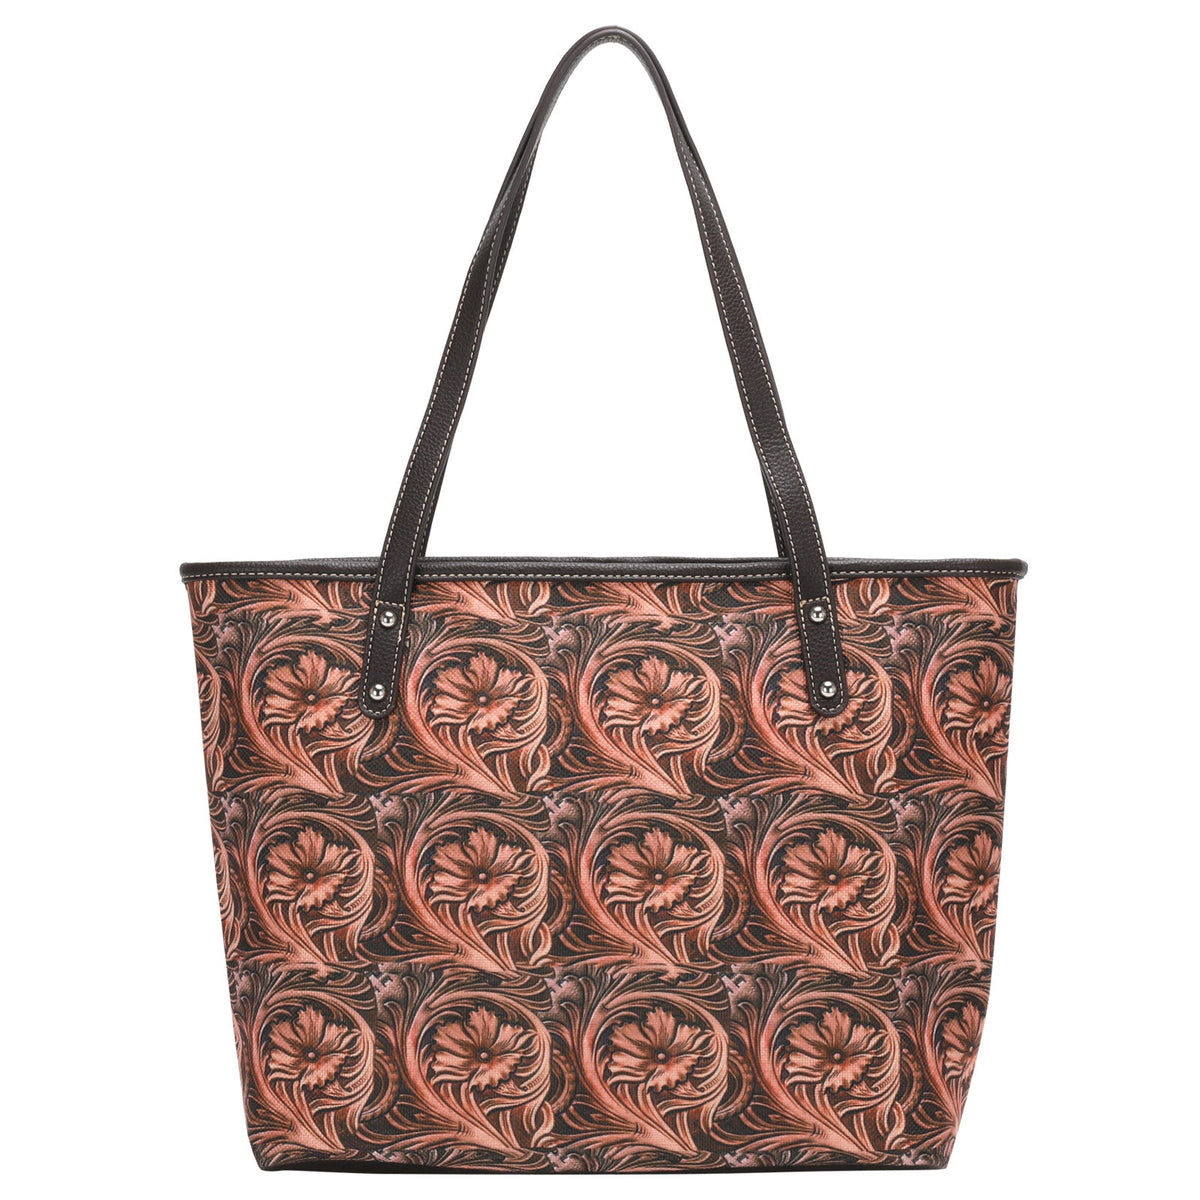 Montana West Vintage Floral Print Canvas Tote Bag - Cowgirl Wear